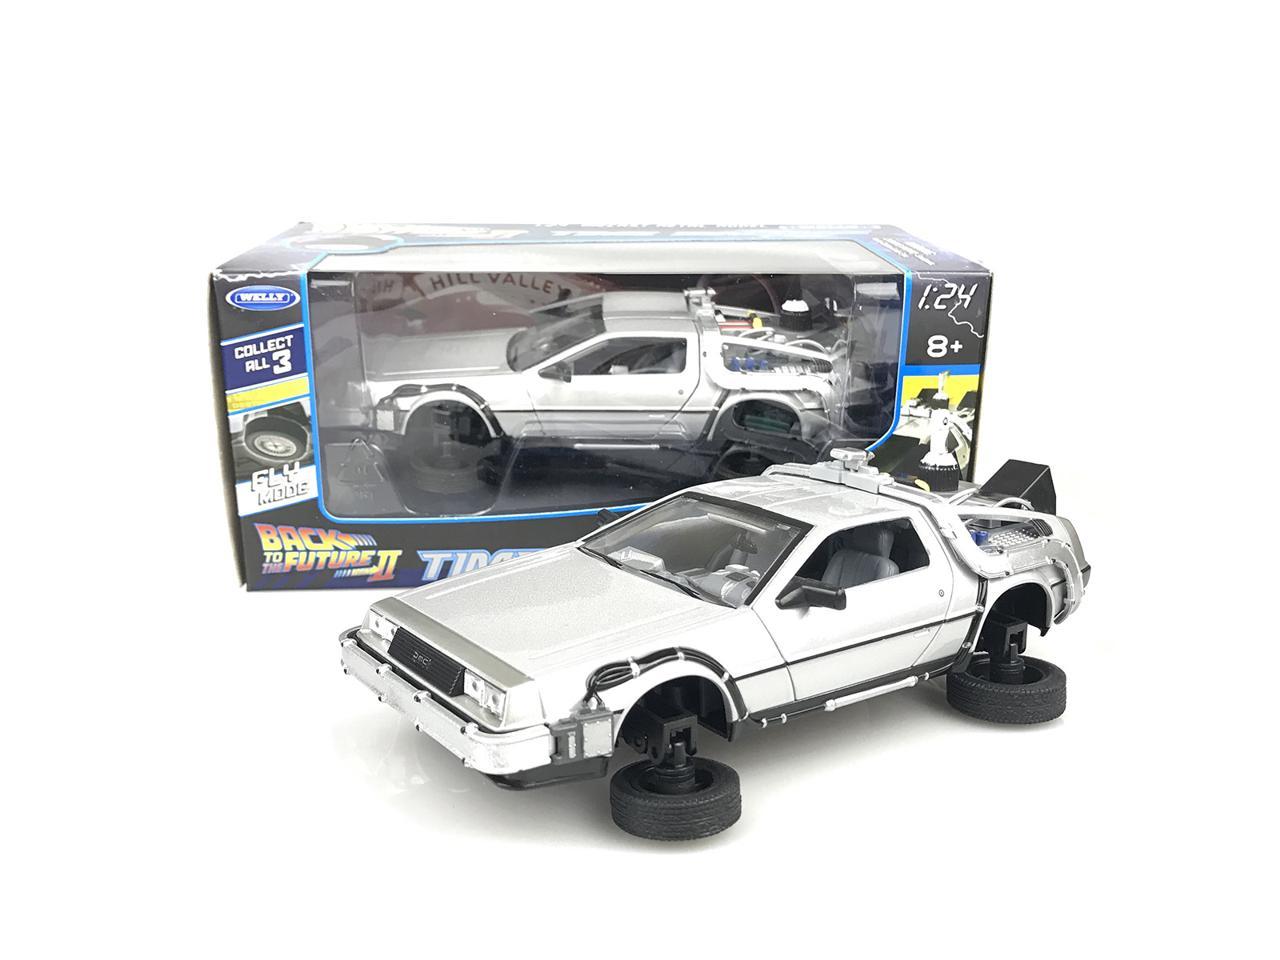 1:24 Diecast Model Car 22441FV new DeLorean Back to the Future 2 "Fly Mode" 